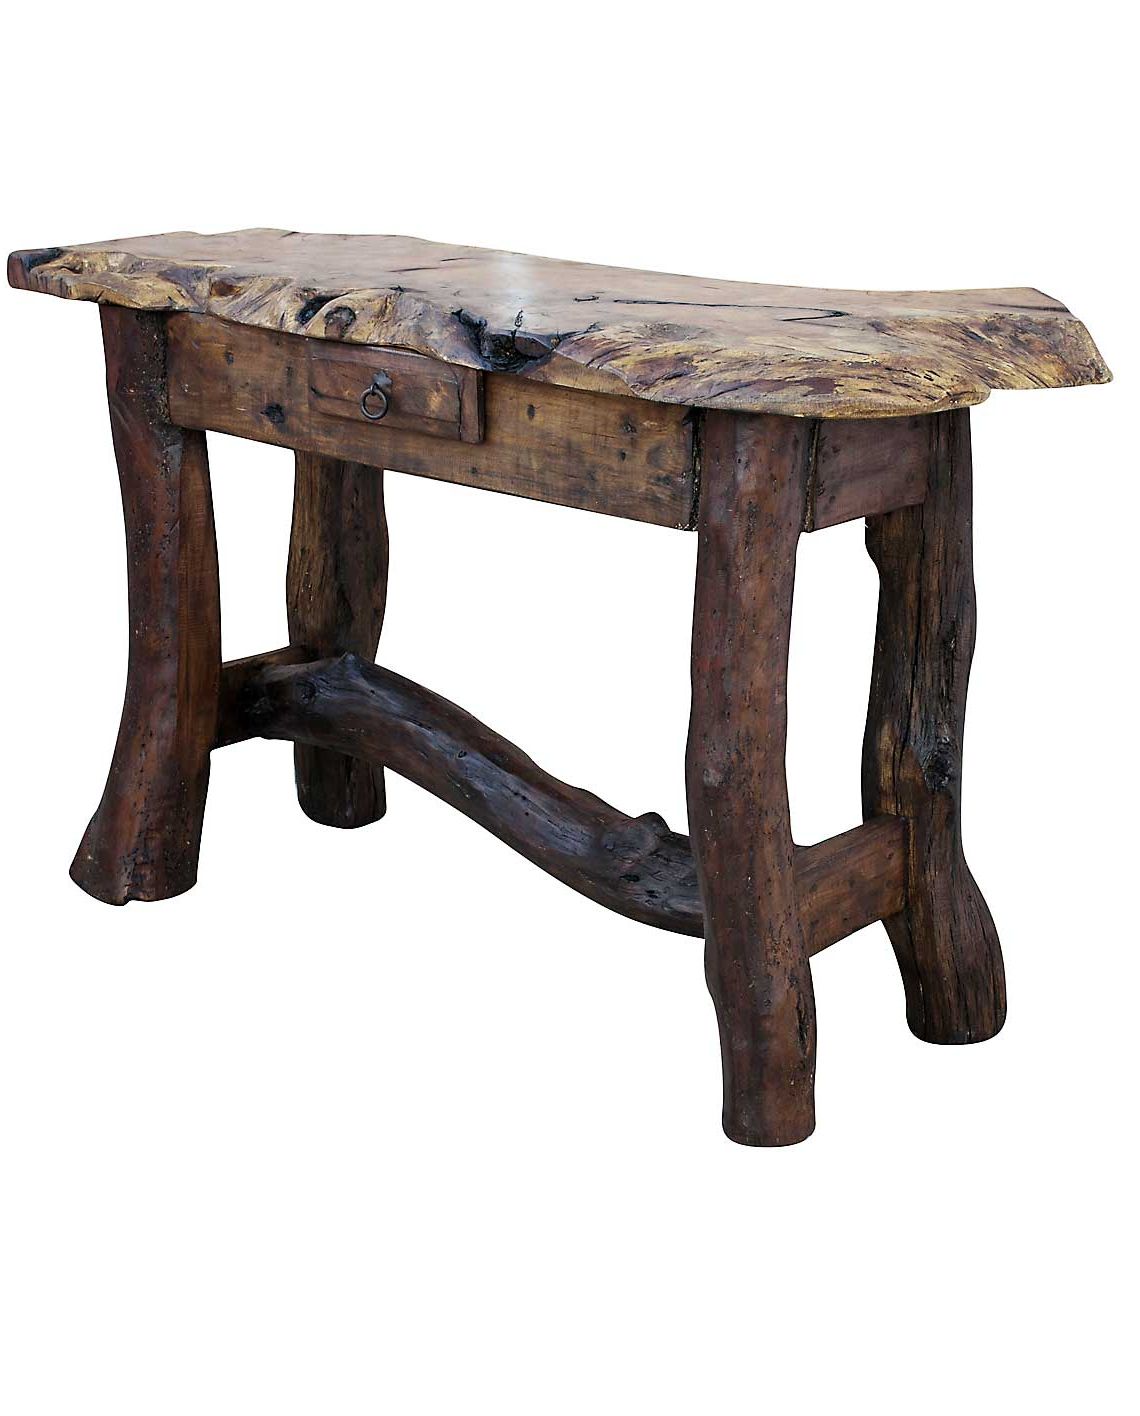 Most Recent Rustic Espresso Wood Console Tables Throughout Barron Rustic Sofa Table – Luxury Rustic Furniture (View 2 of 10)